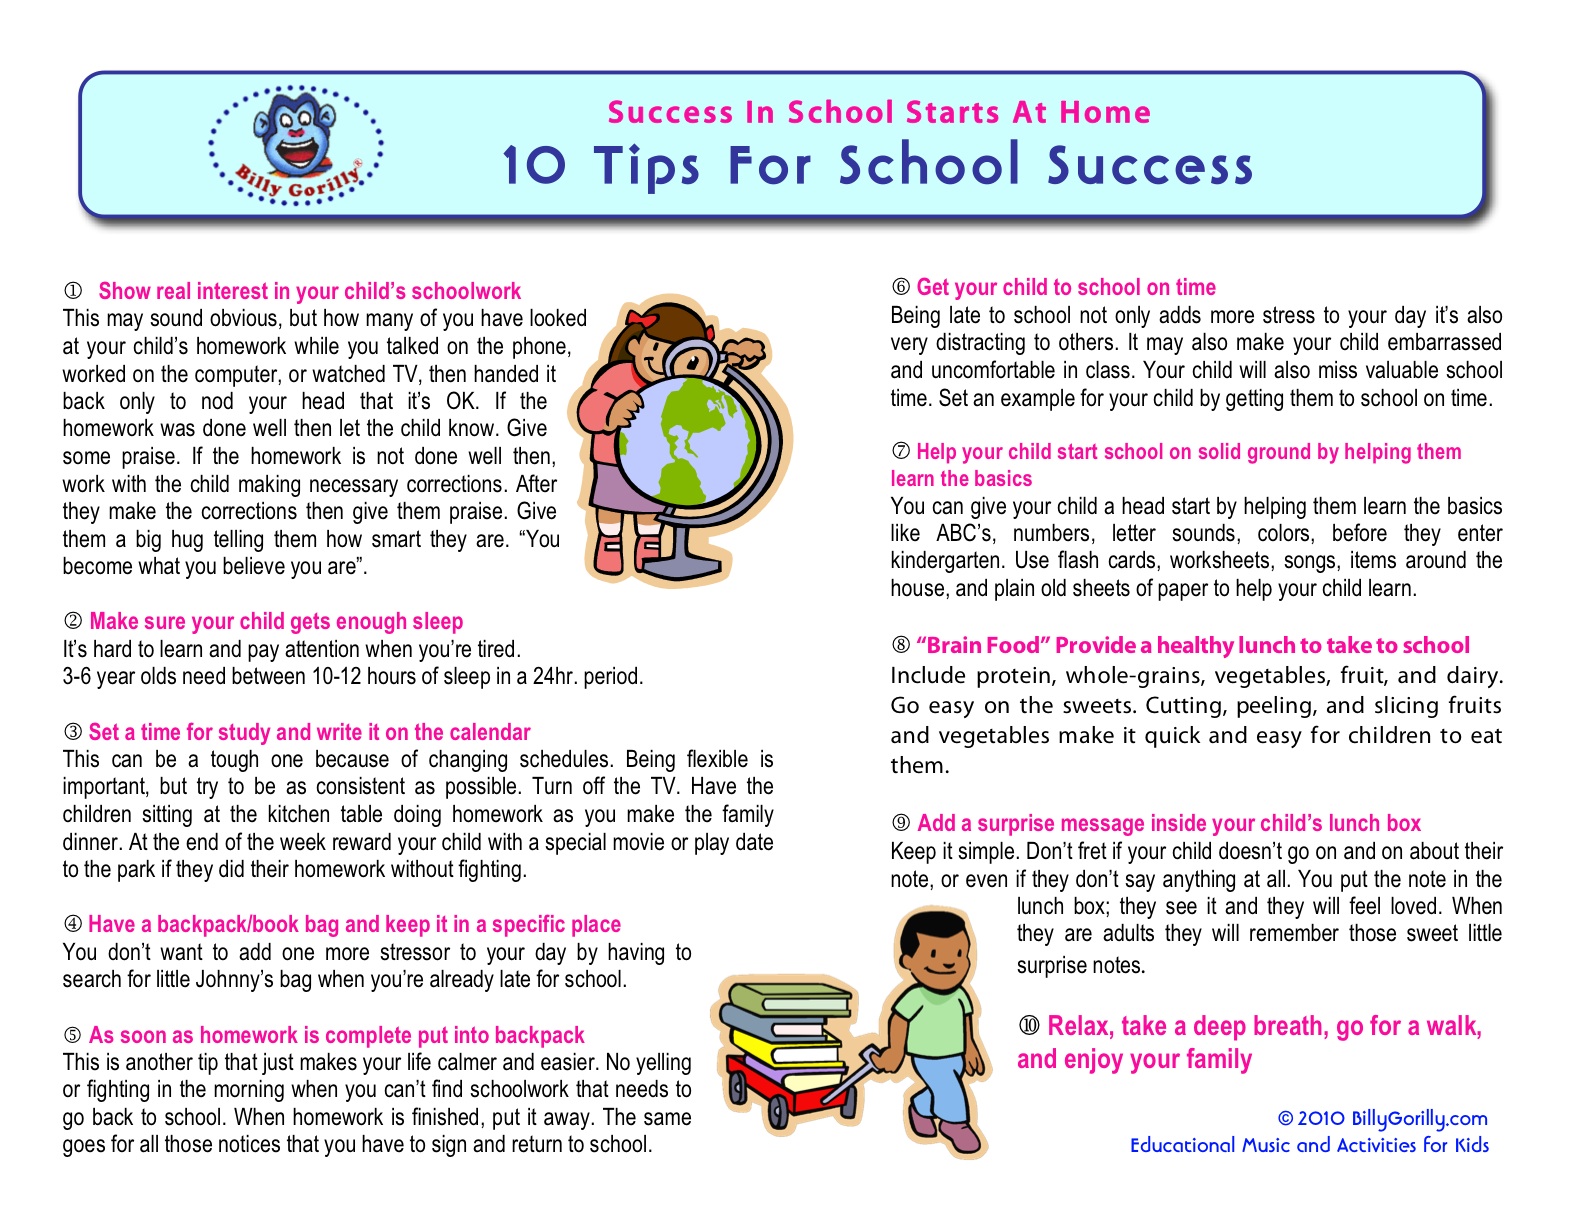 Click on image for printable version of tips